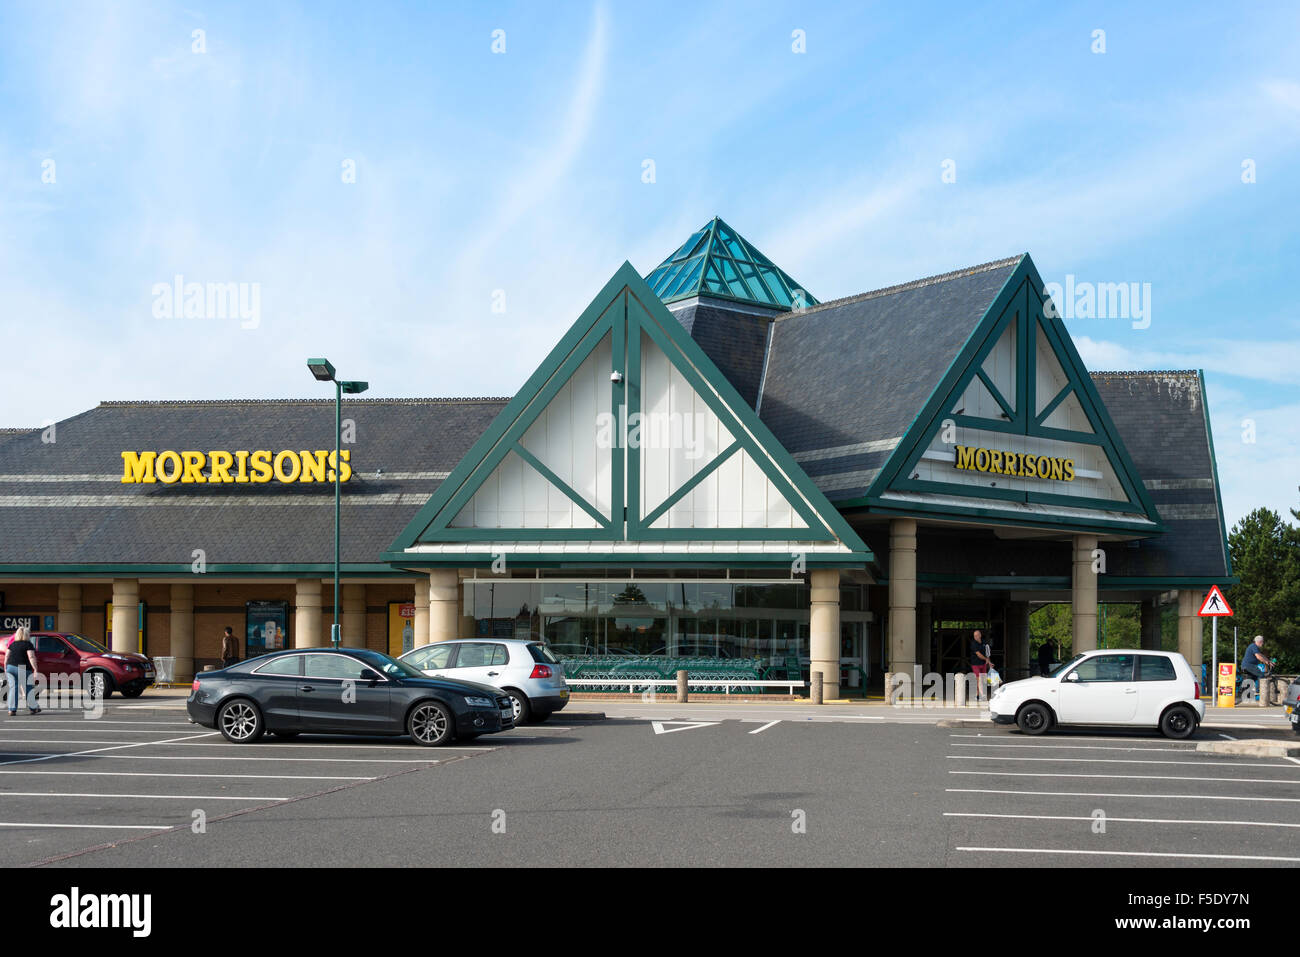 Supermarché Morrisons, Oakley Road, Corby, Northamptonshire, Angleterre, Royaume-Uni Banque D'Images